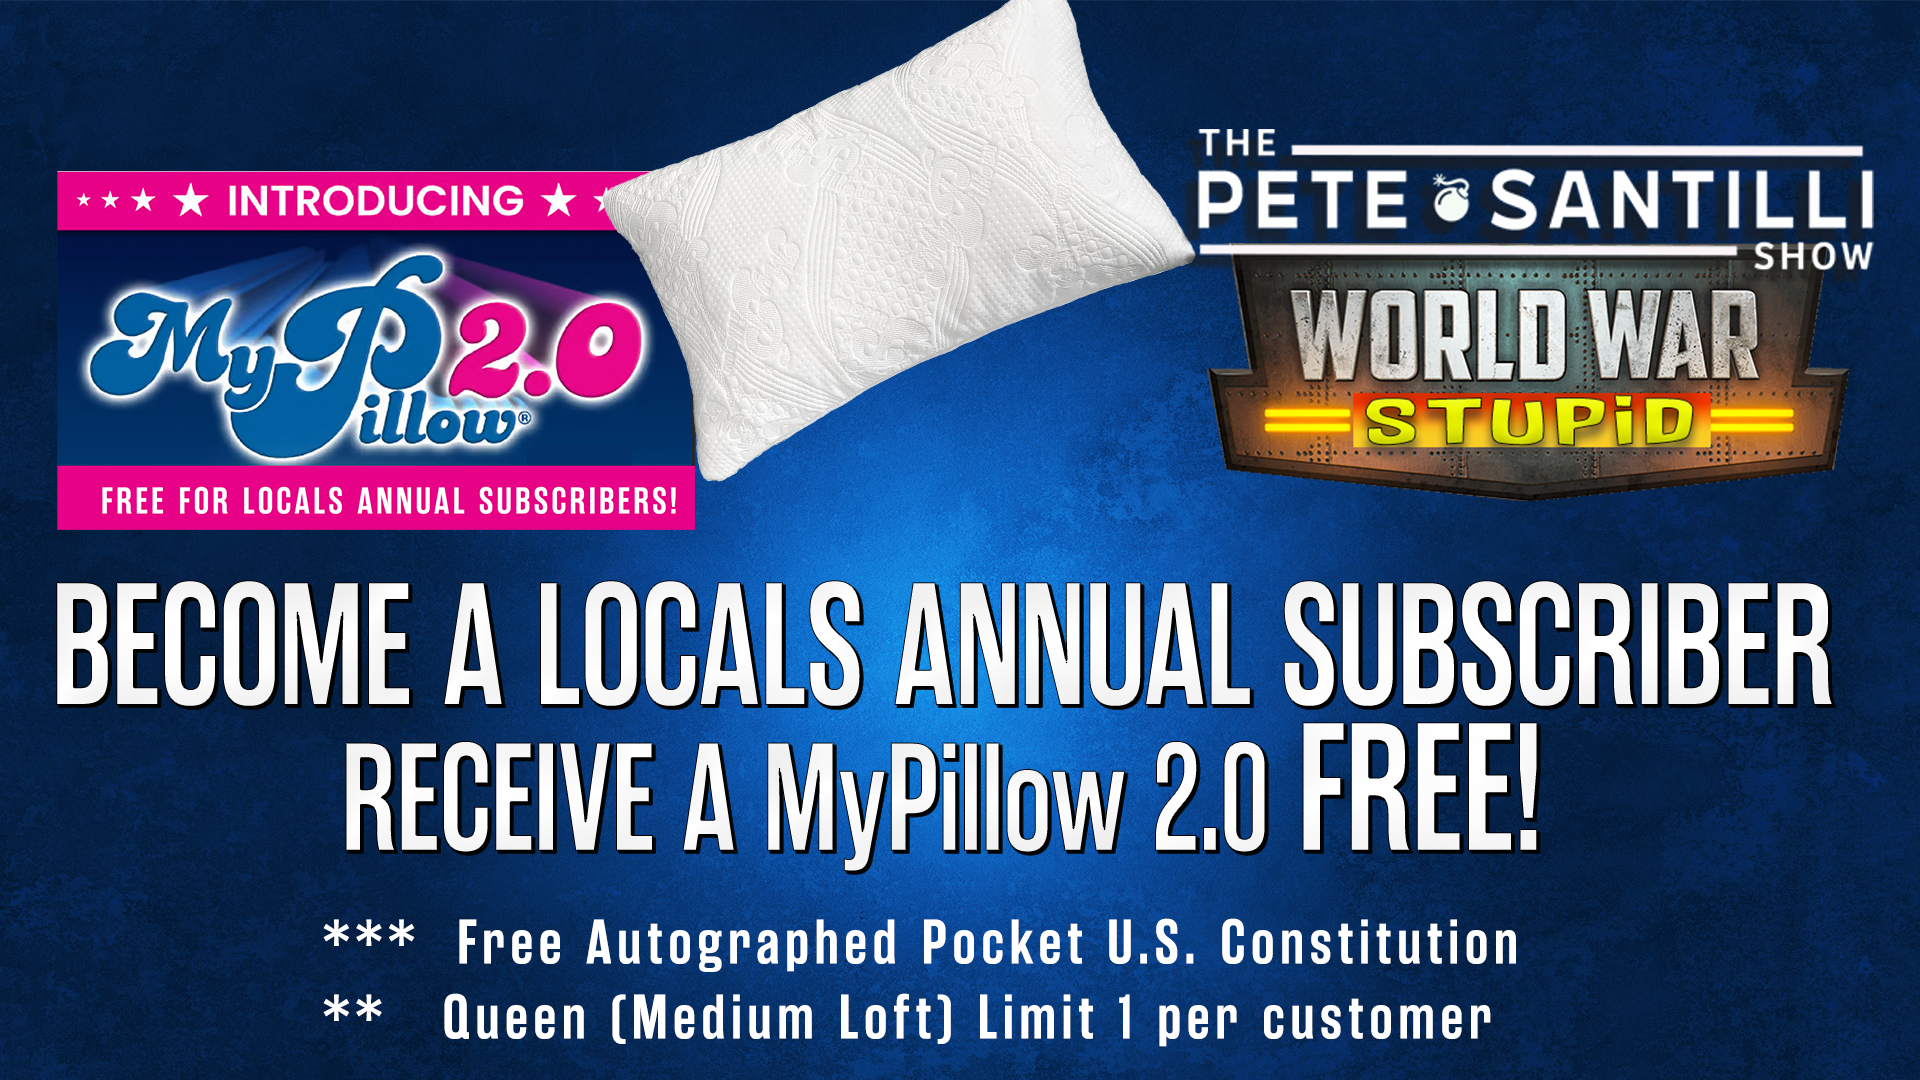 LOCALS ANNUAL SUBSCRIBER - FREE MyPillow 2.0